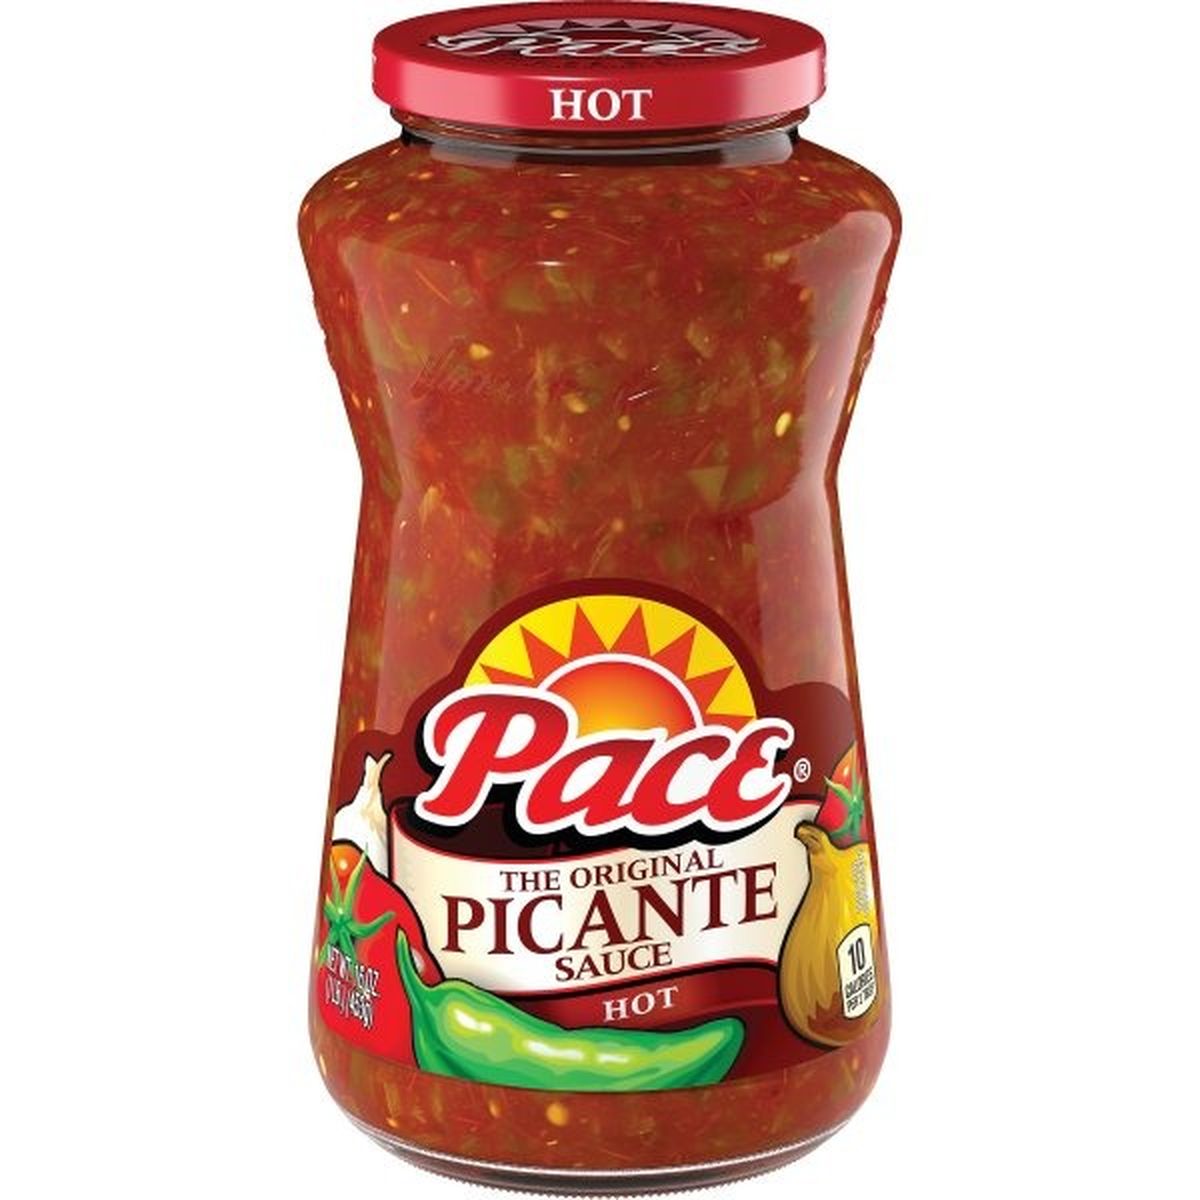 Calories in Paces Hot Picante Sauce